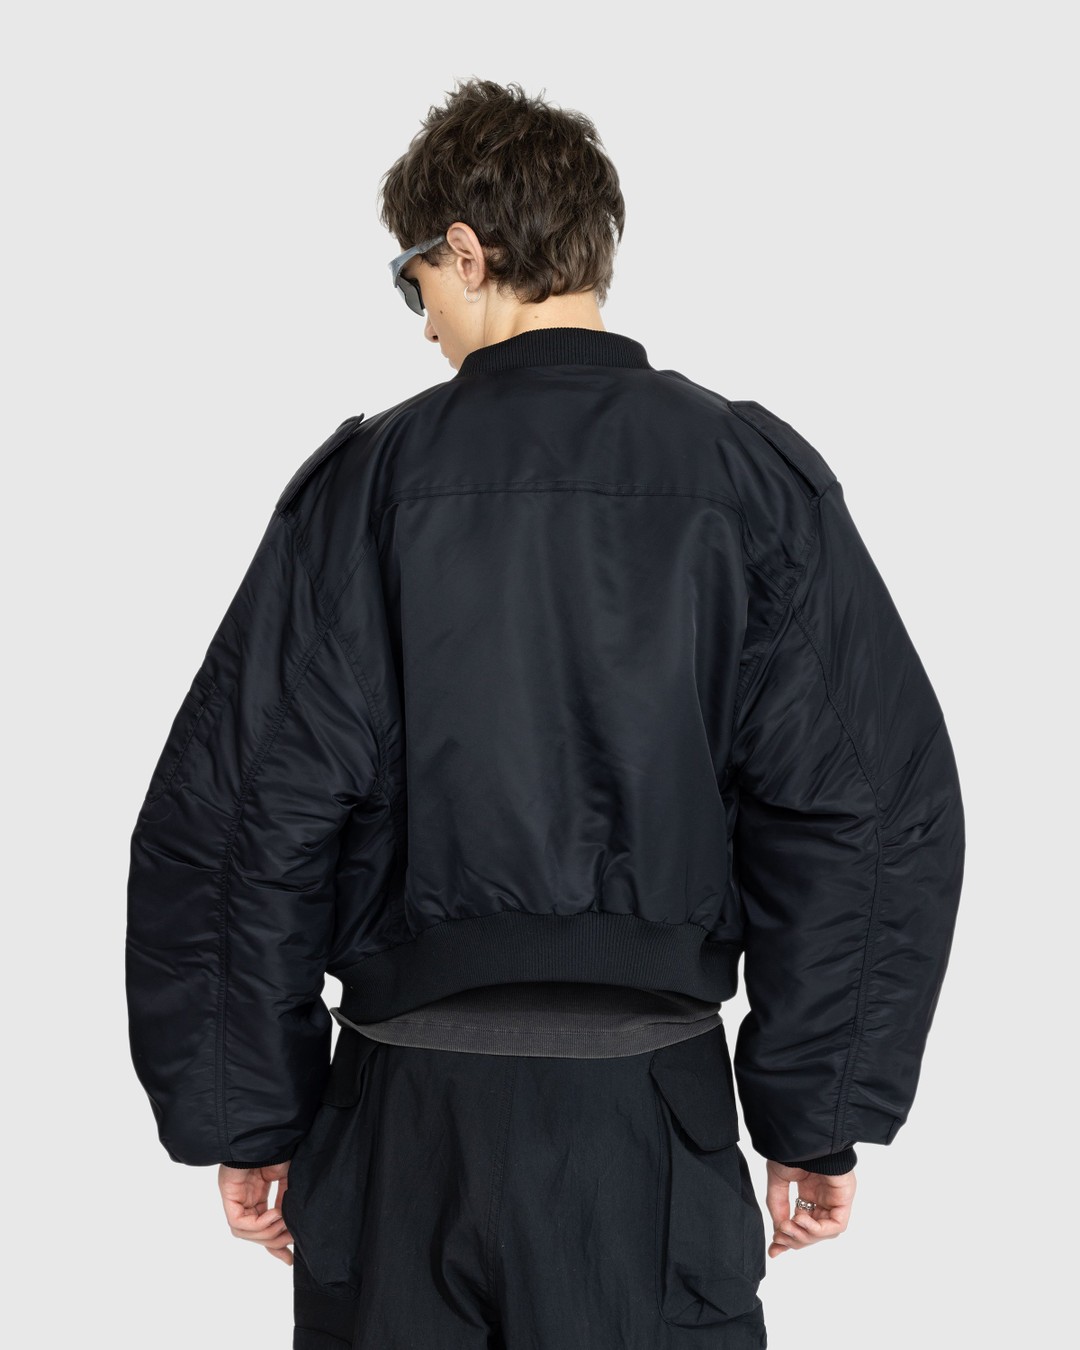 Entire Studios – A-2 Bomber Oil - Outerwear - Blue - Image 3